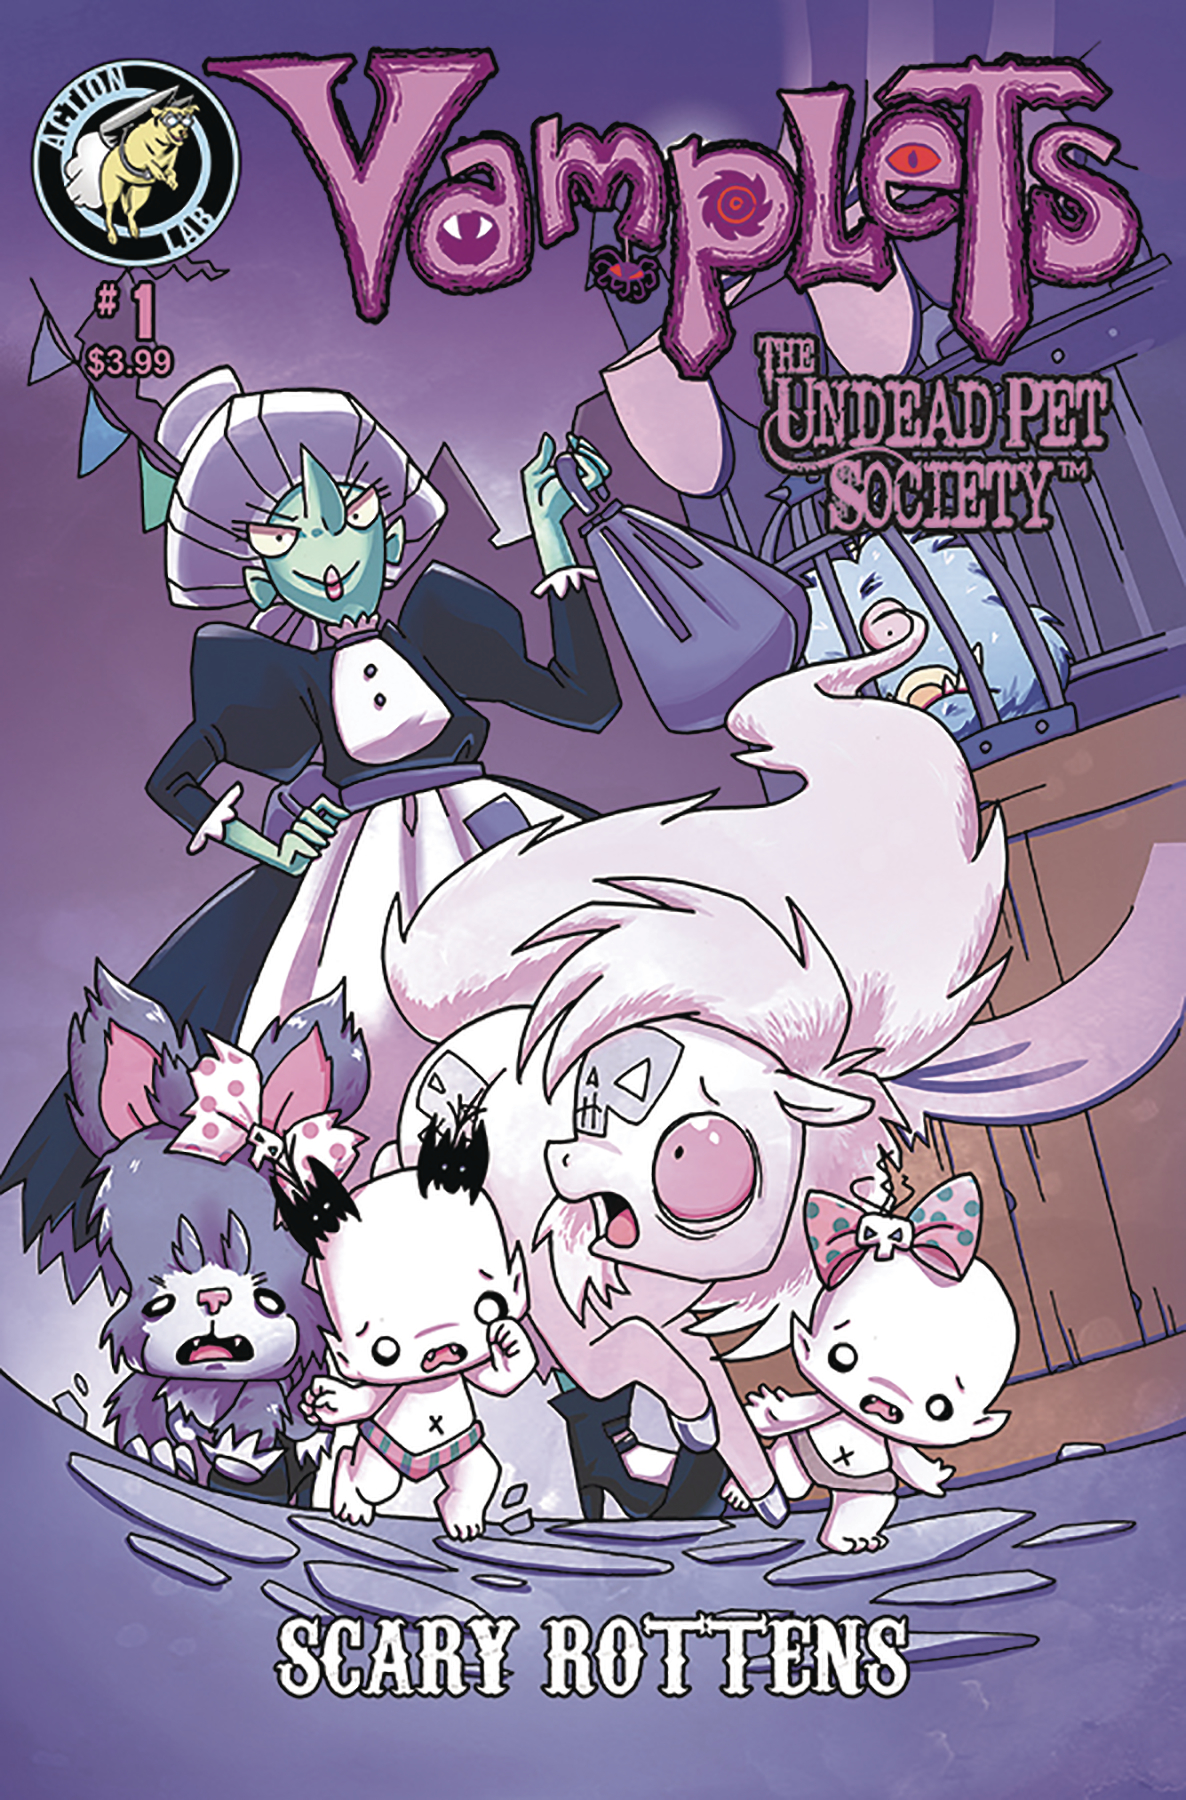 Vamplets Undead Pet Society: Scary Rottens no. 1 (2019)